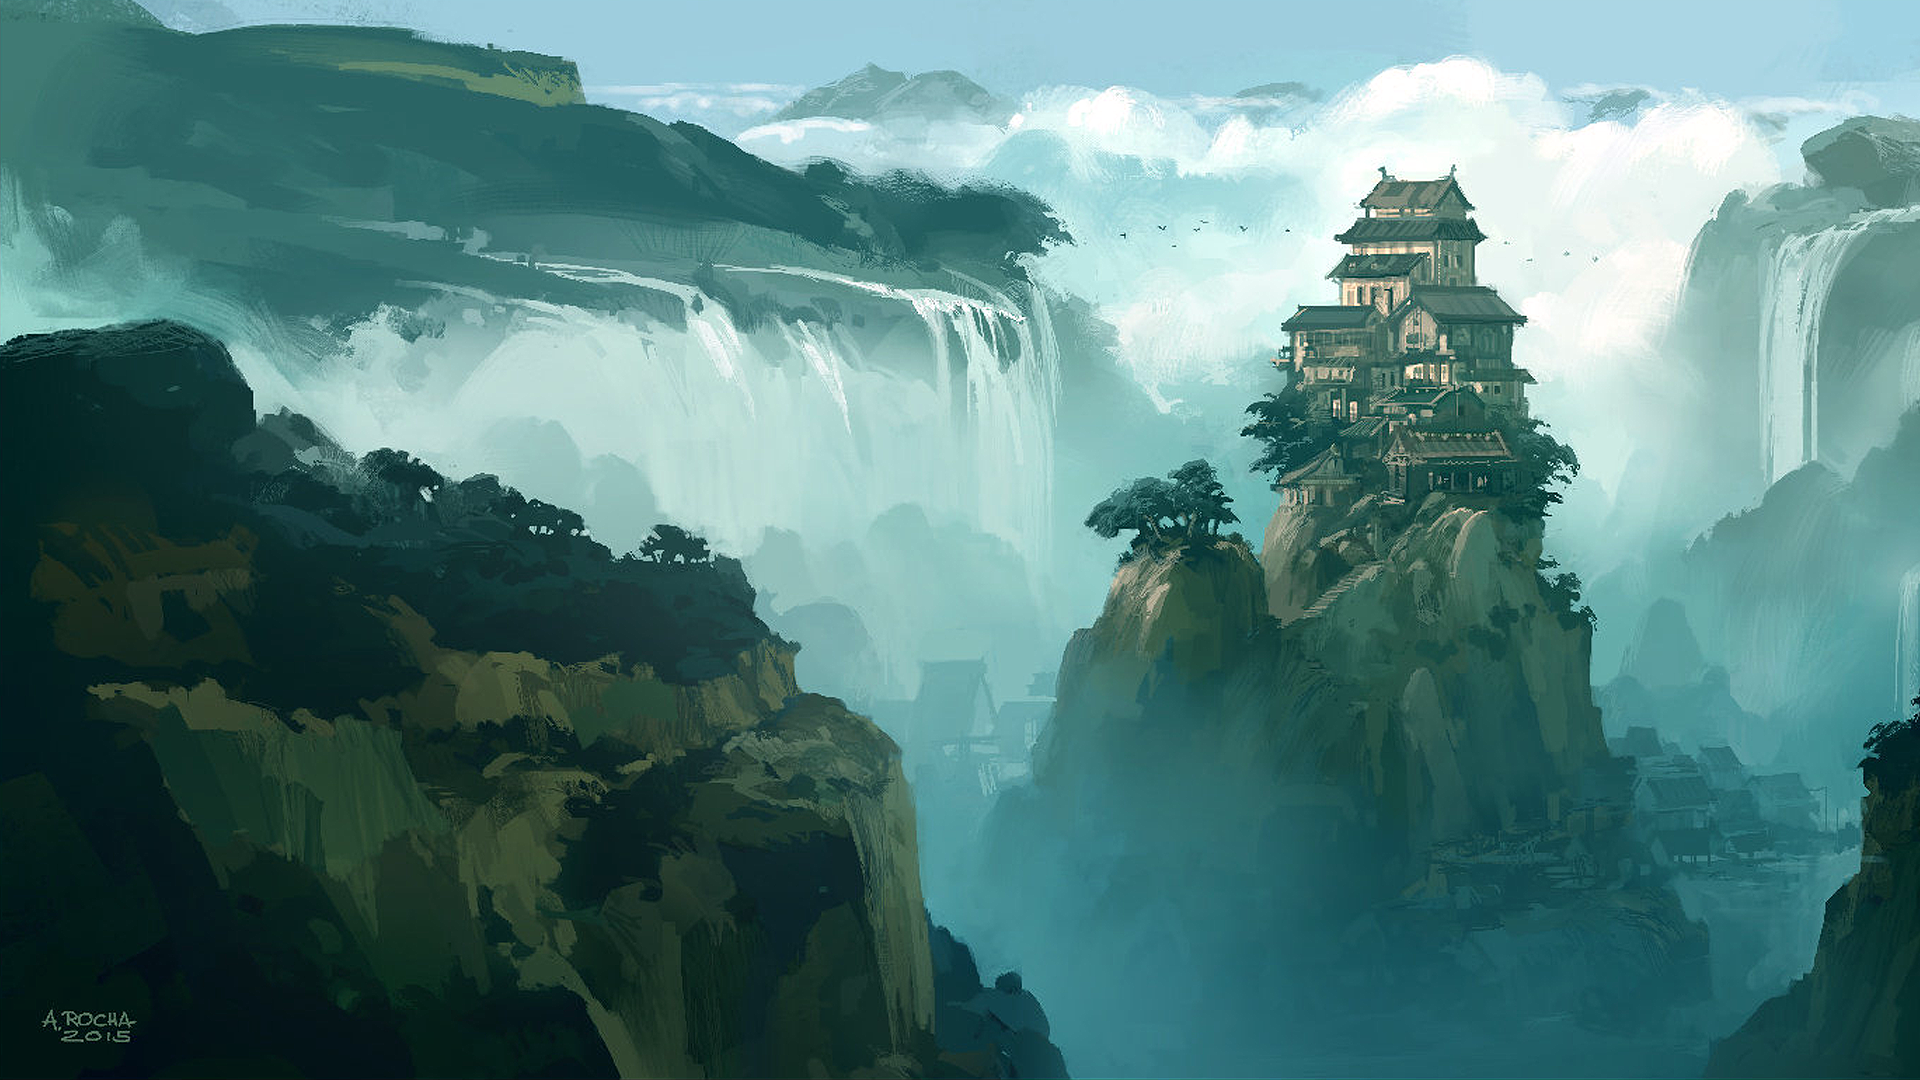 Andreas Rocha Artwork Digital Art Mountains Waterfall Clouds Castle Wood Trees City Landscape Nature 1920x1080